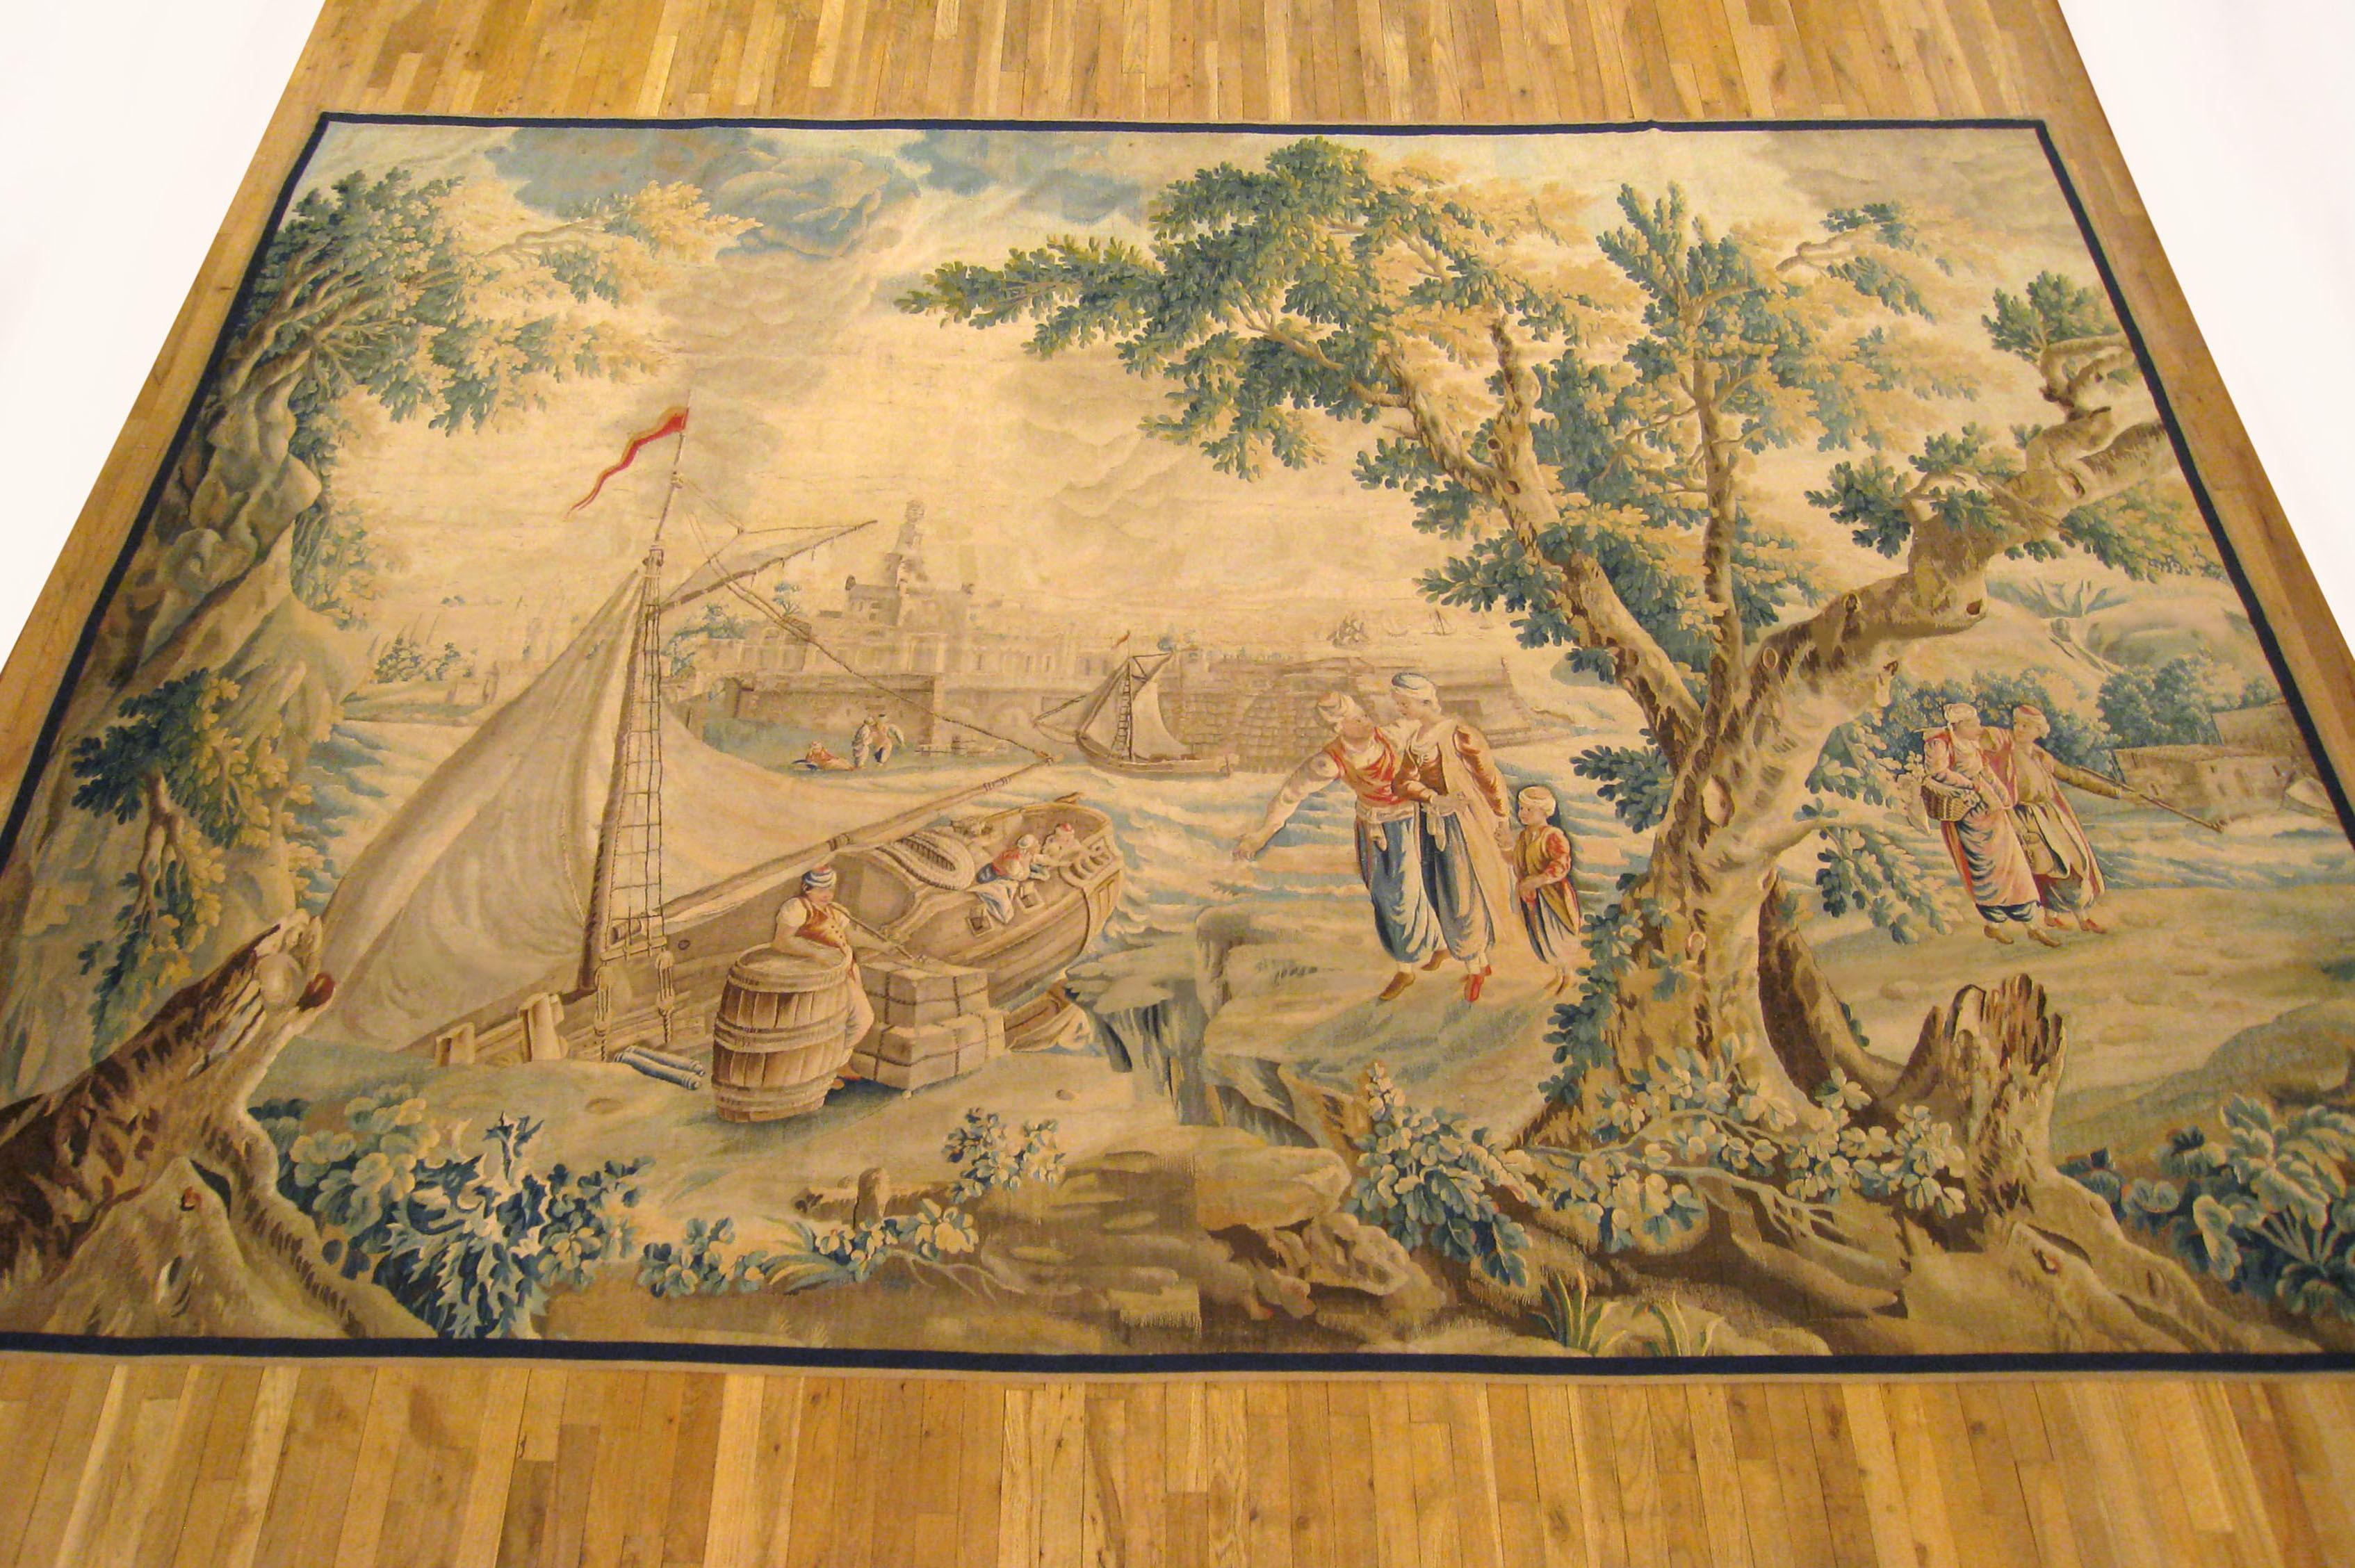 A French Aubusson rustic tapestry from the late 17th century, depicting several villagers on either side of a large tree in the right foreground, watching the cargo being unloaded from a large vessel docked by the verdant river bank at left, with